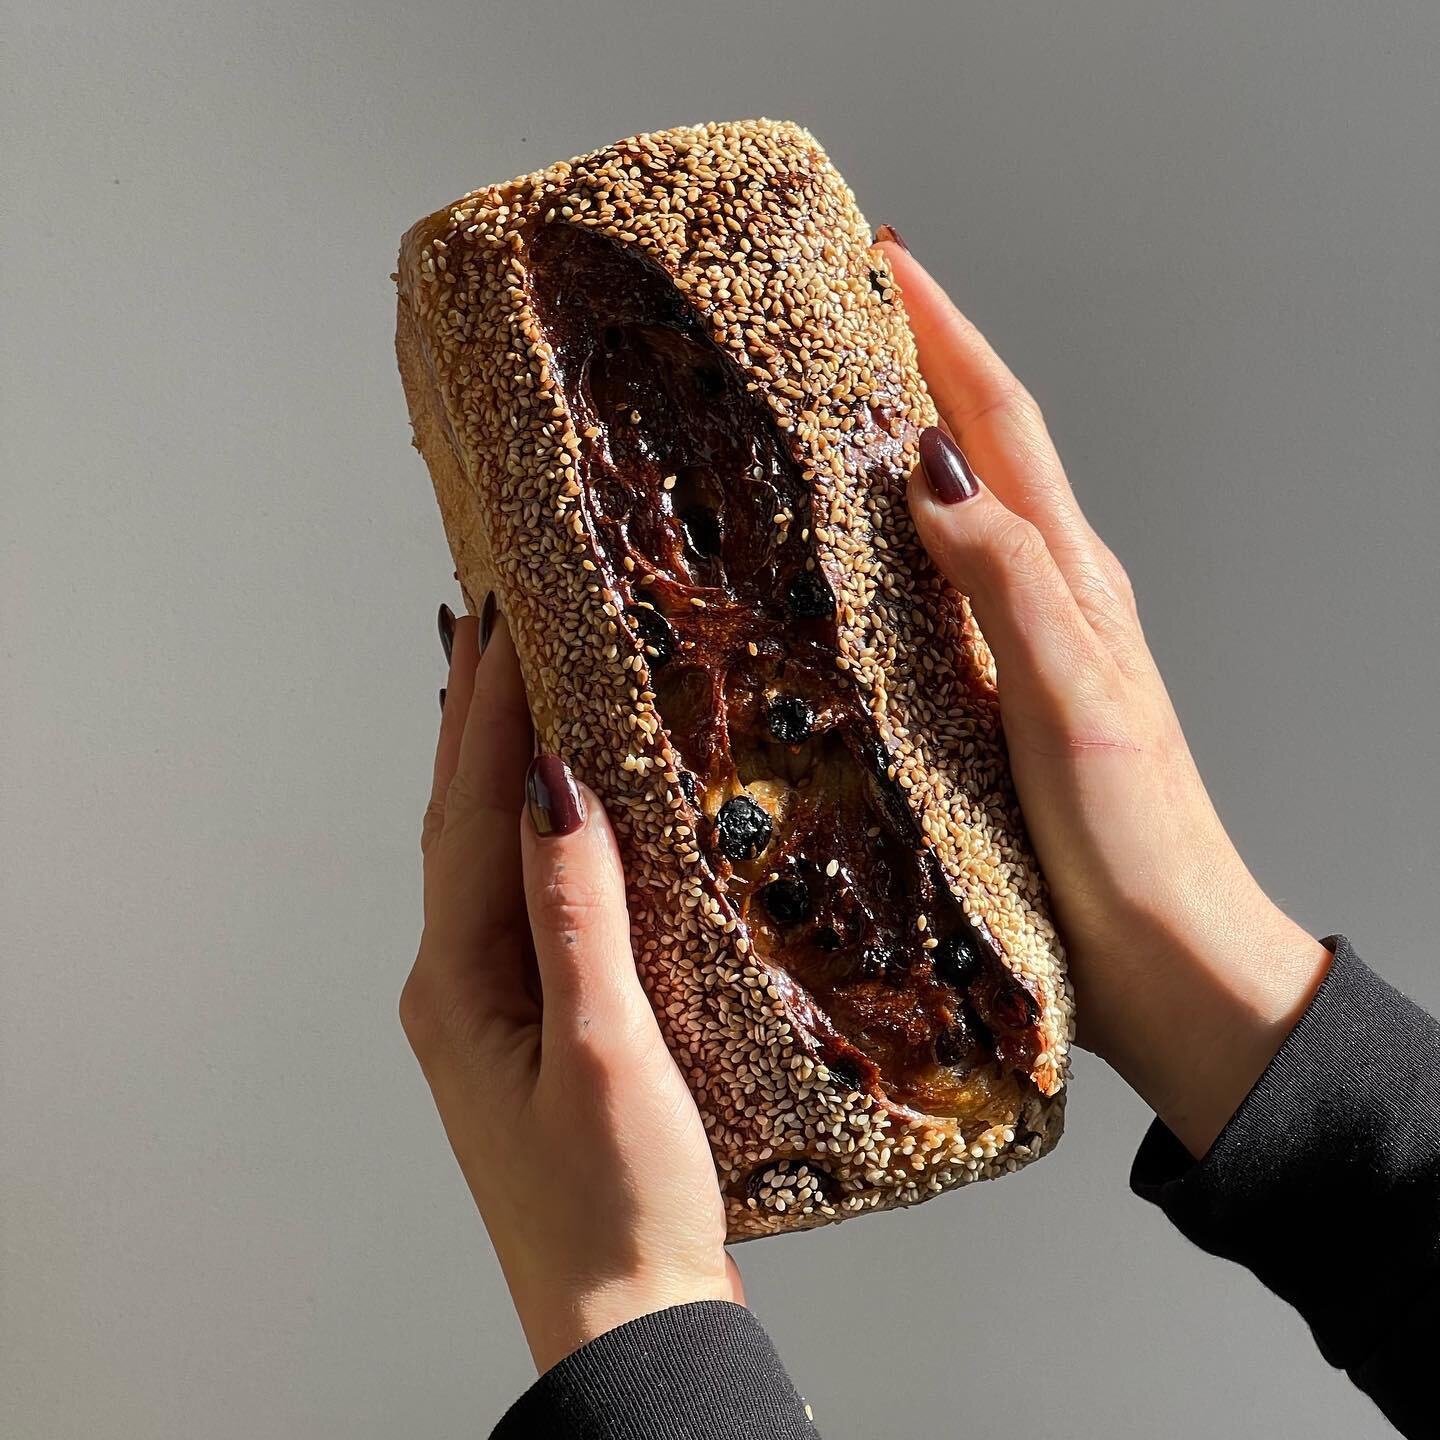 Meet our Spiced Fruit Sourdough&hellip;

This delicious loaf has been on our shelves since day one &amp; has barely changed at all&hellip; 

We use our signature spiced fruit mix, which is a combination of currants, raisins, chopped apricots, whole a